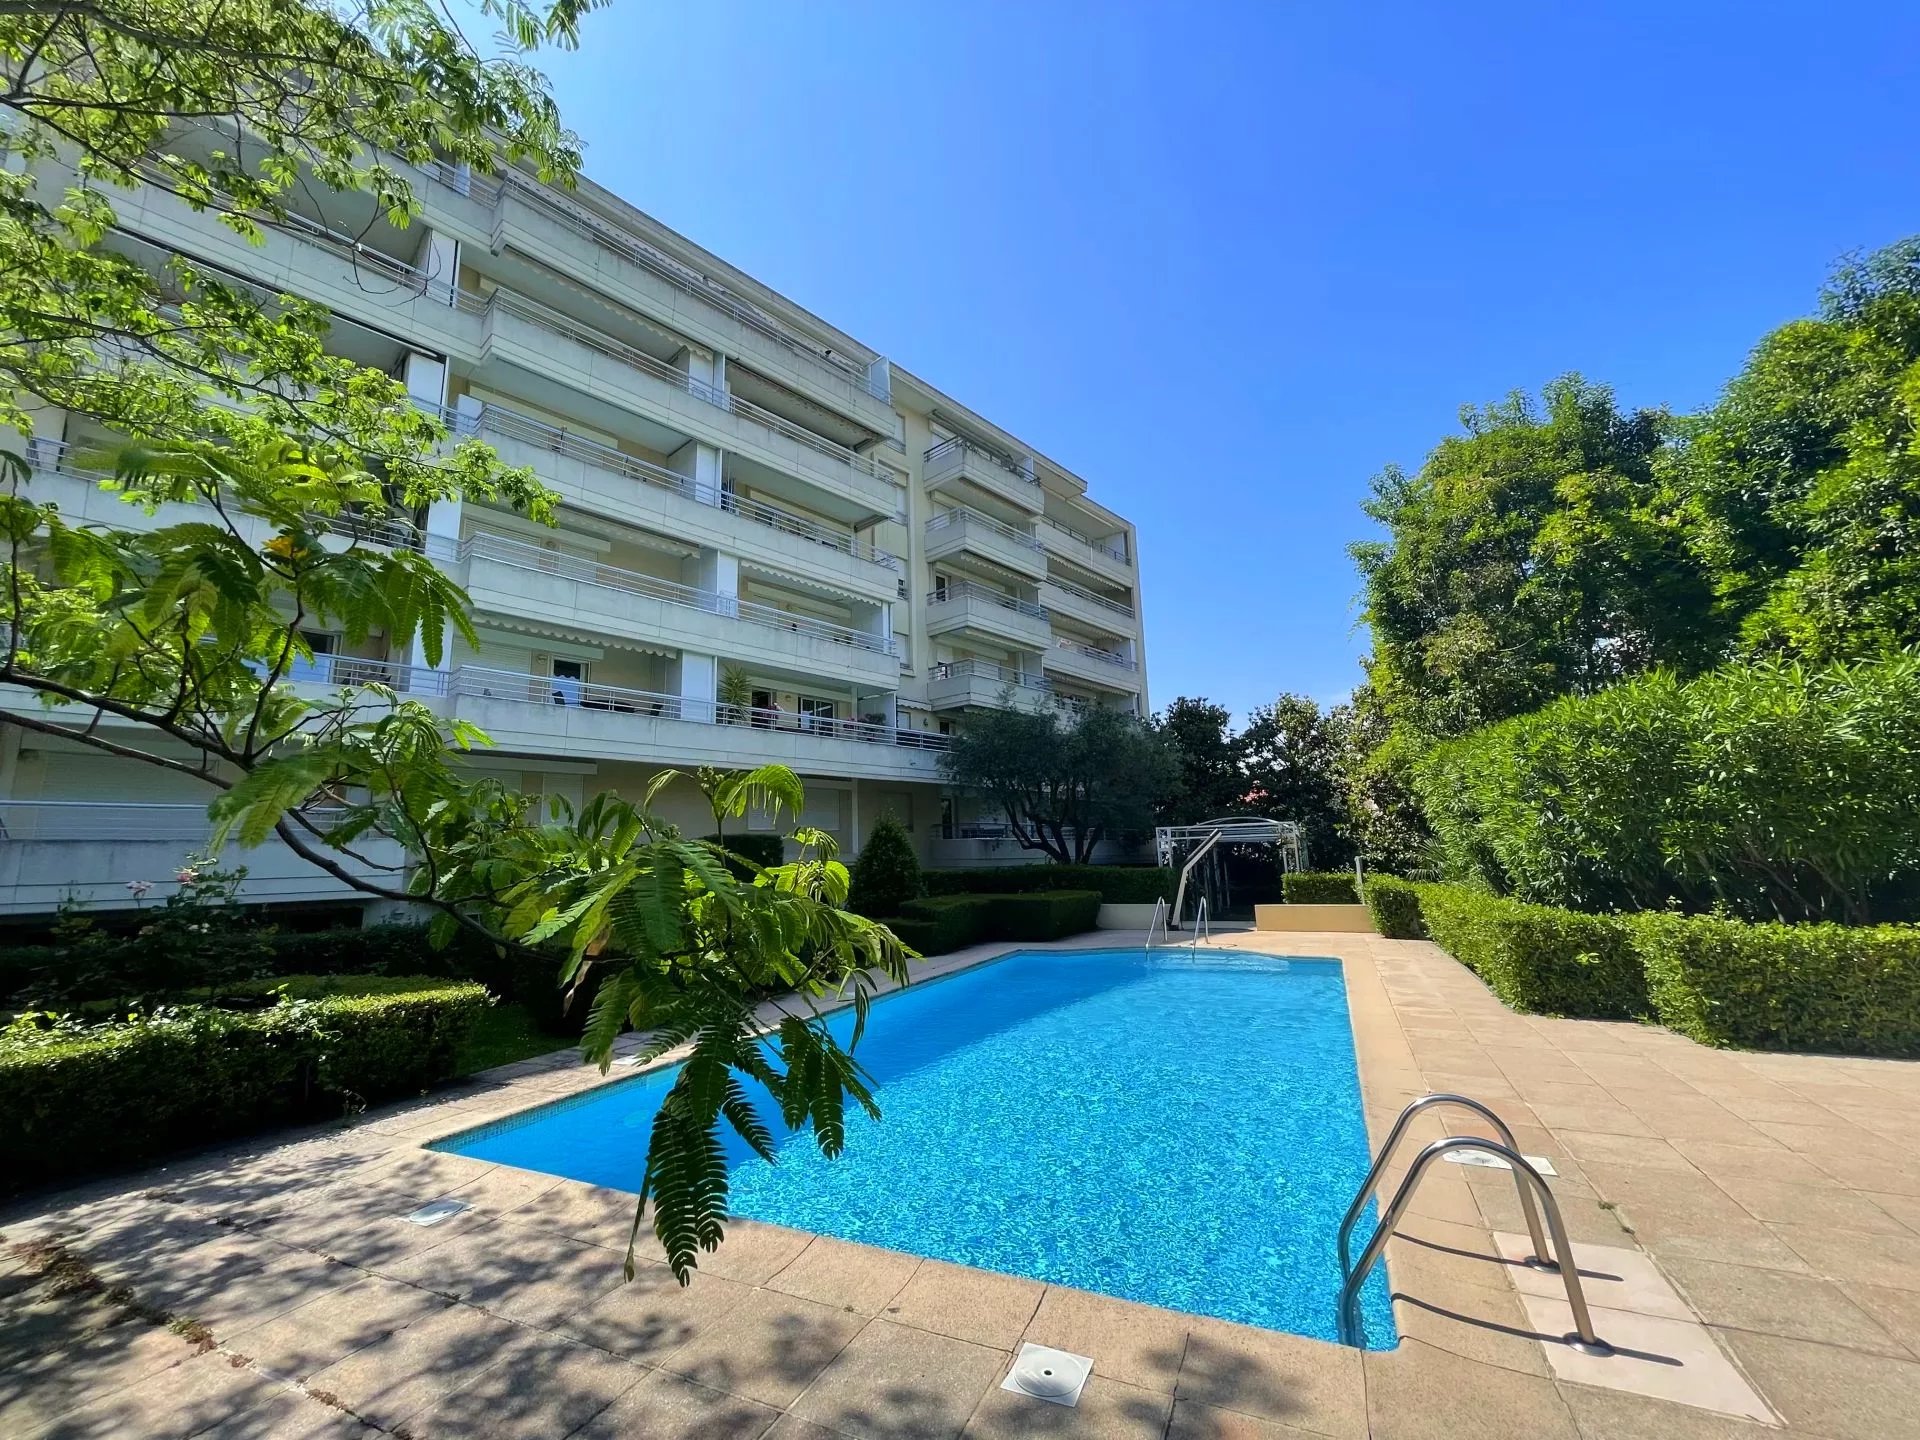 CANNES SALE APARTMENT 3P NEAR CENTER AND BEACHES. SWIMMING POOL IN RESIDENCE